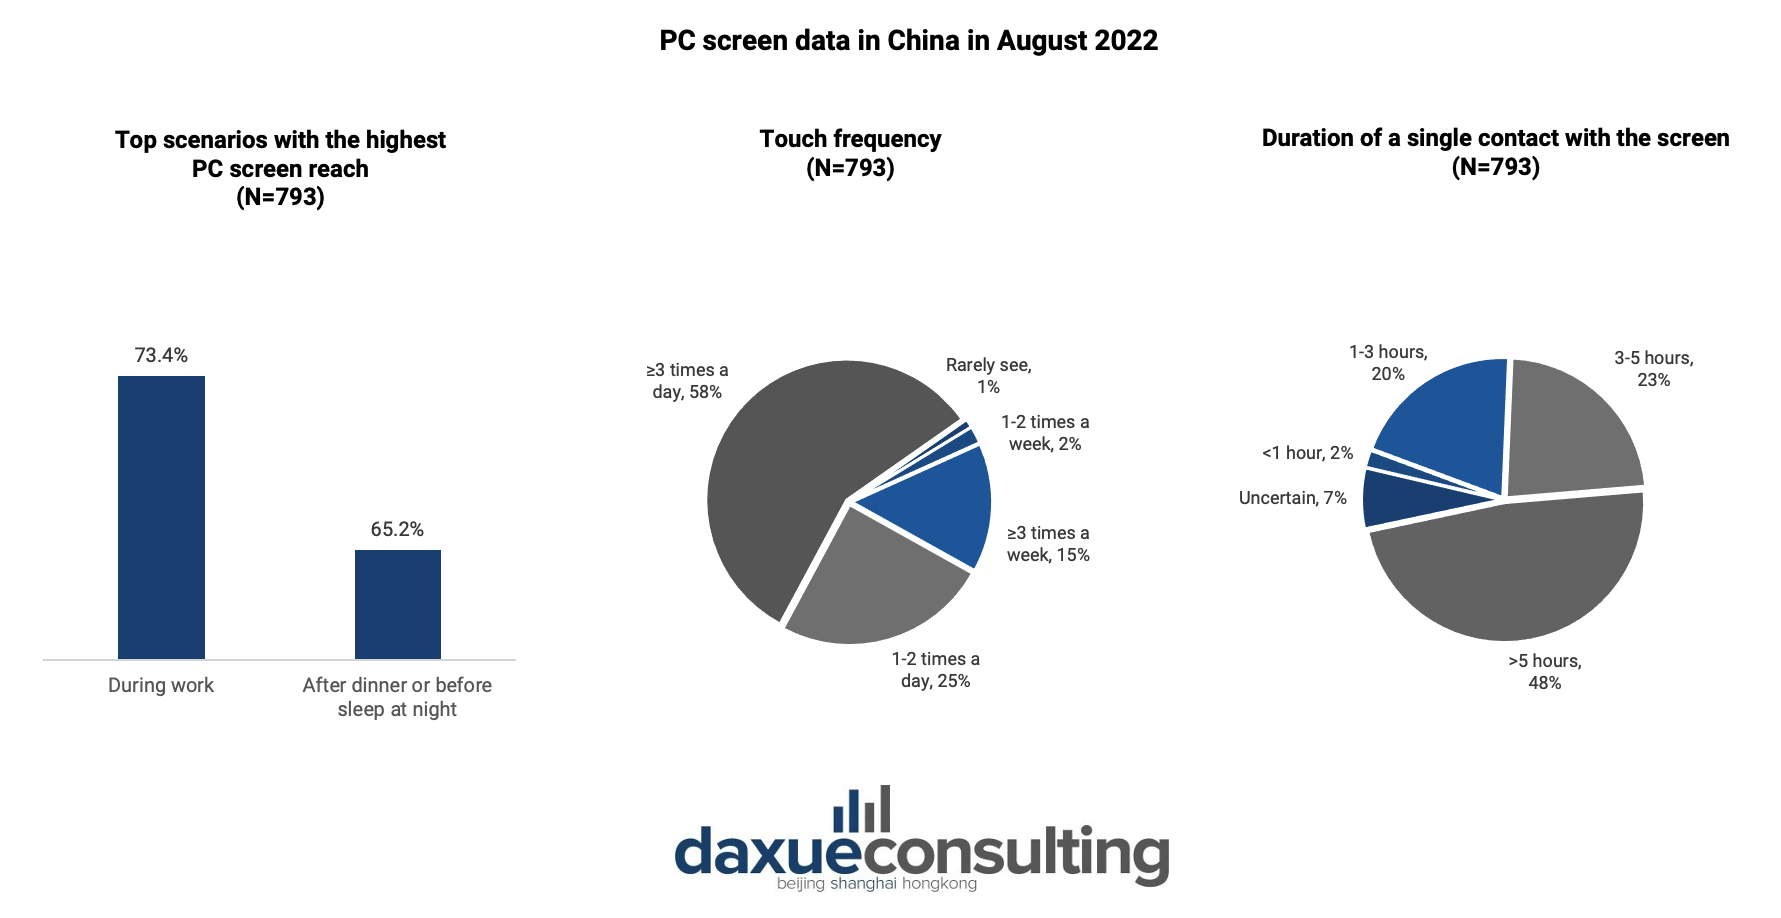 PC screen data in China in August 2022